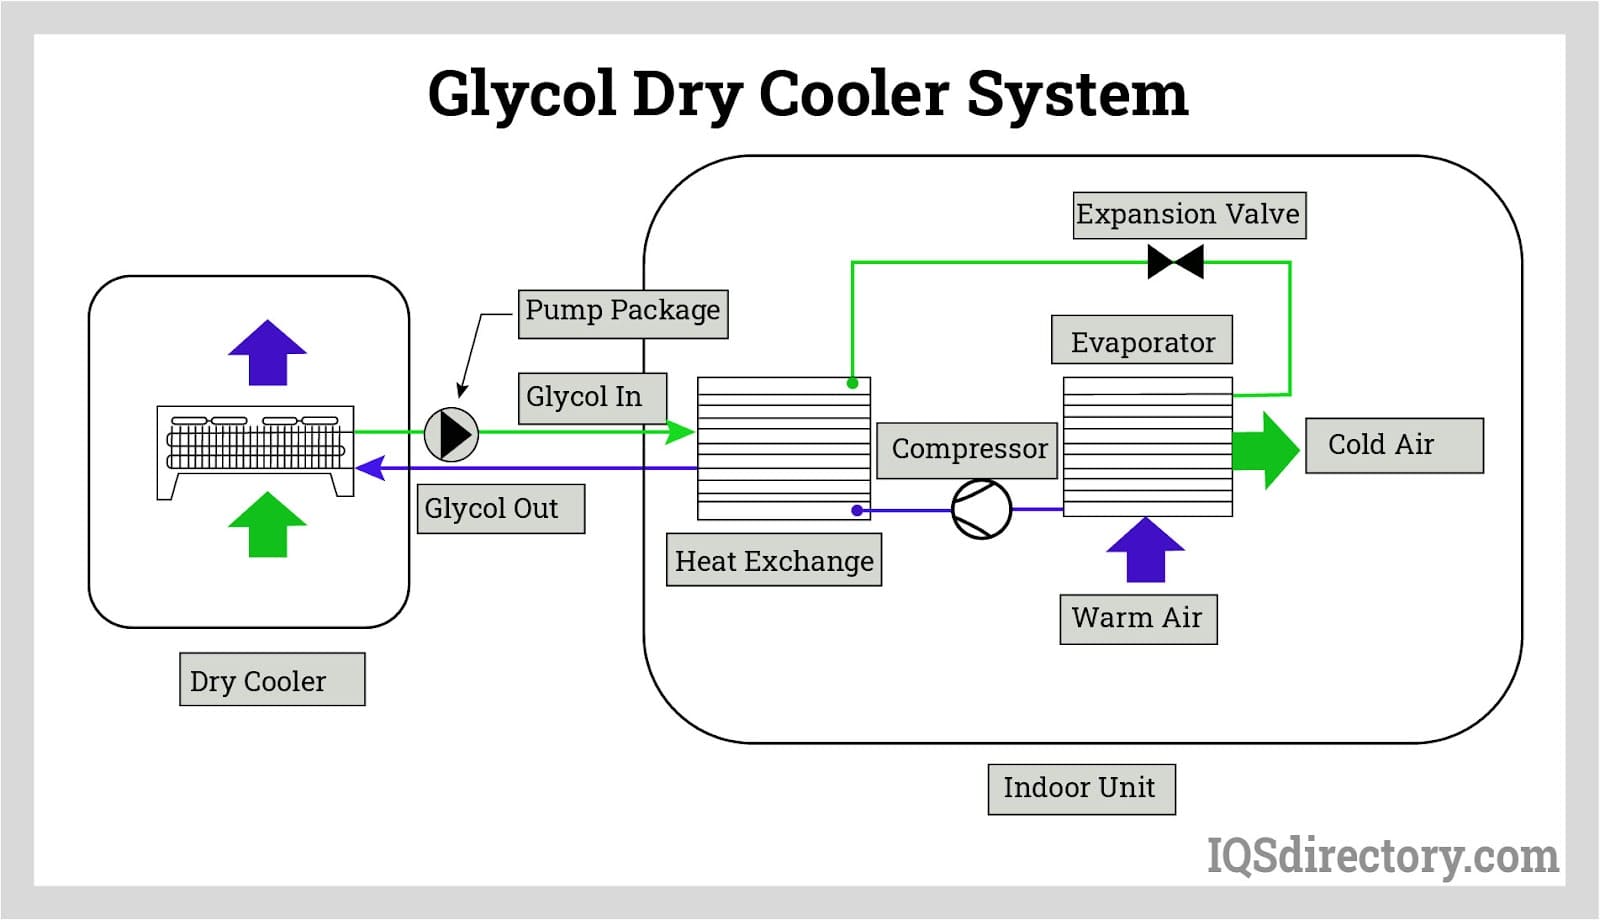 Glycol Dry Cooler System